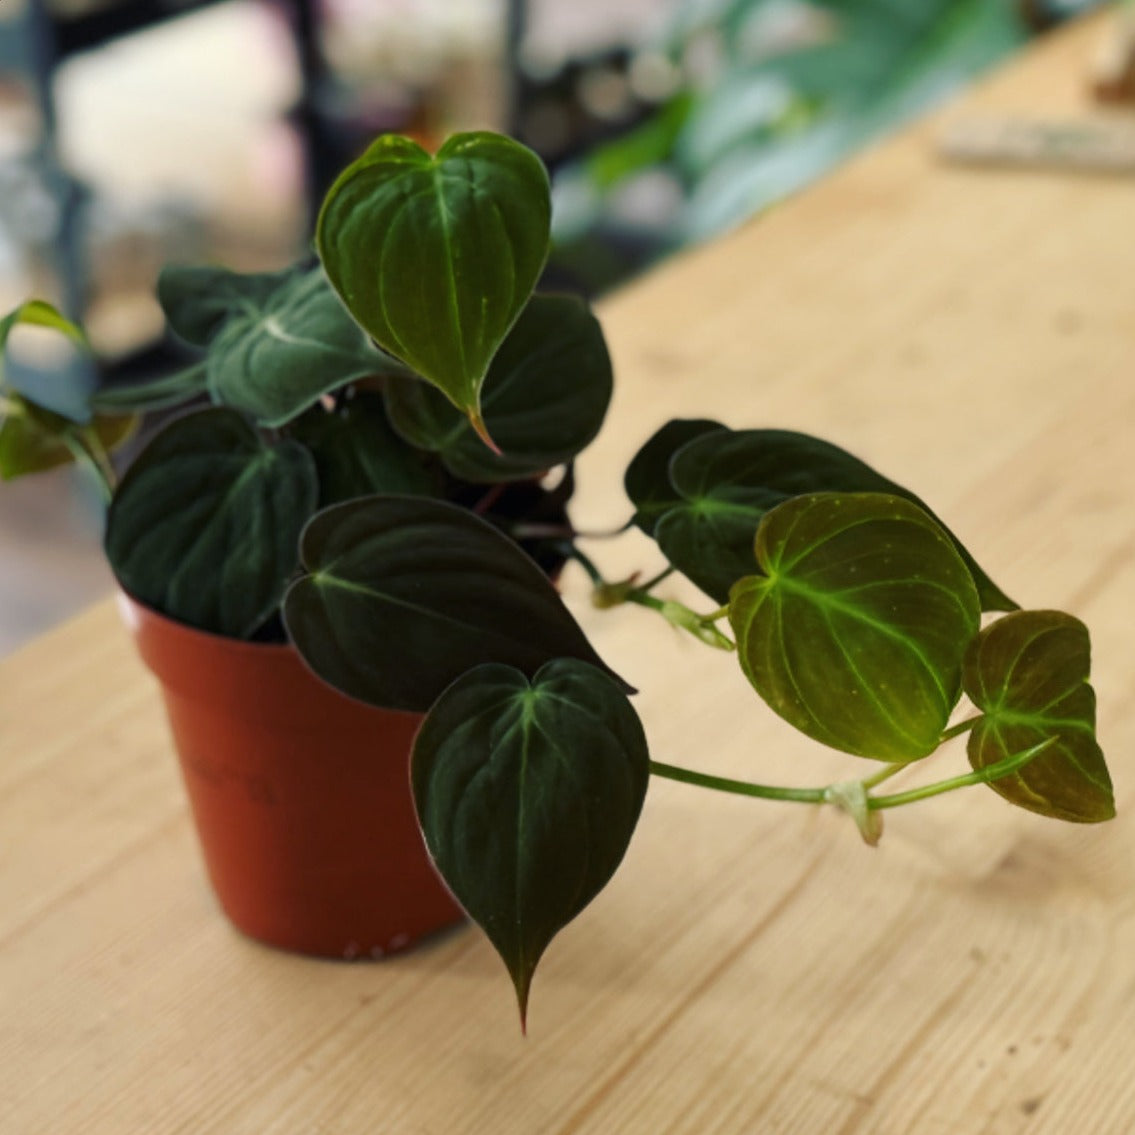 Philodendron hederaceum var. hederaceum Micans | Philodendron scandens micans | Kletterphilodendron | Herzblatt-Philodendron